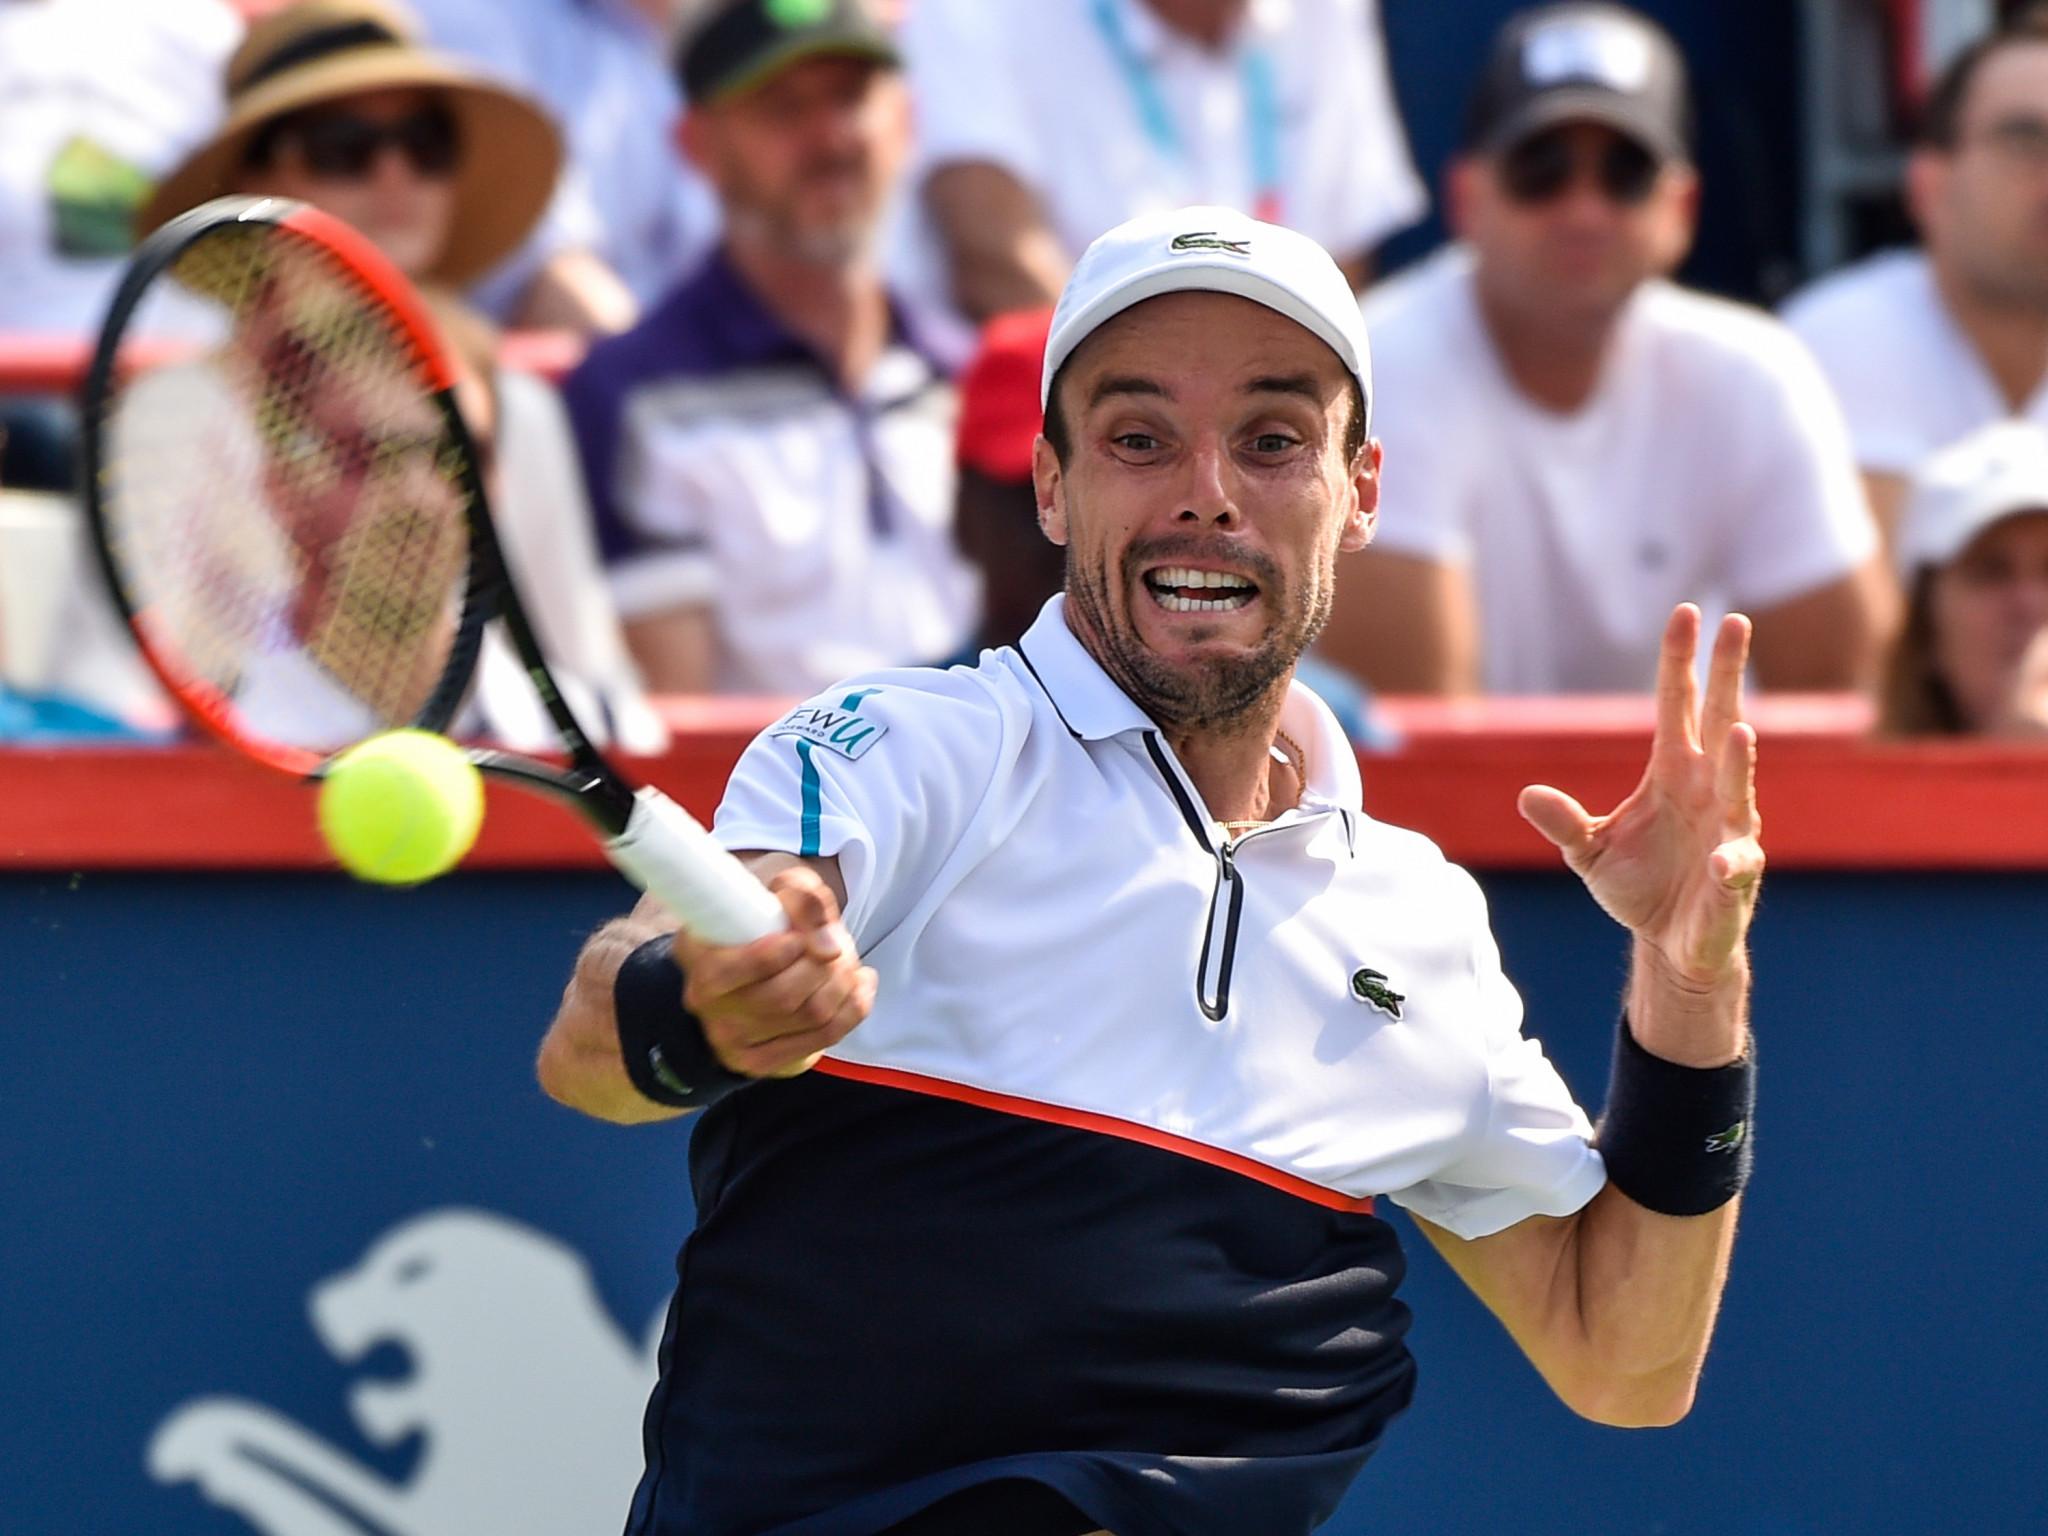 Spain’s Roberto Bautista Agut is through to the second round of the Rogers Cup after beating Australia’s Bernard Tomic in straight sets in Montreal ©Getty Images